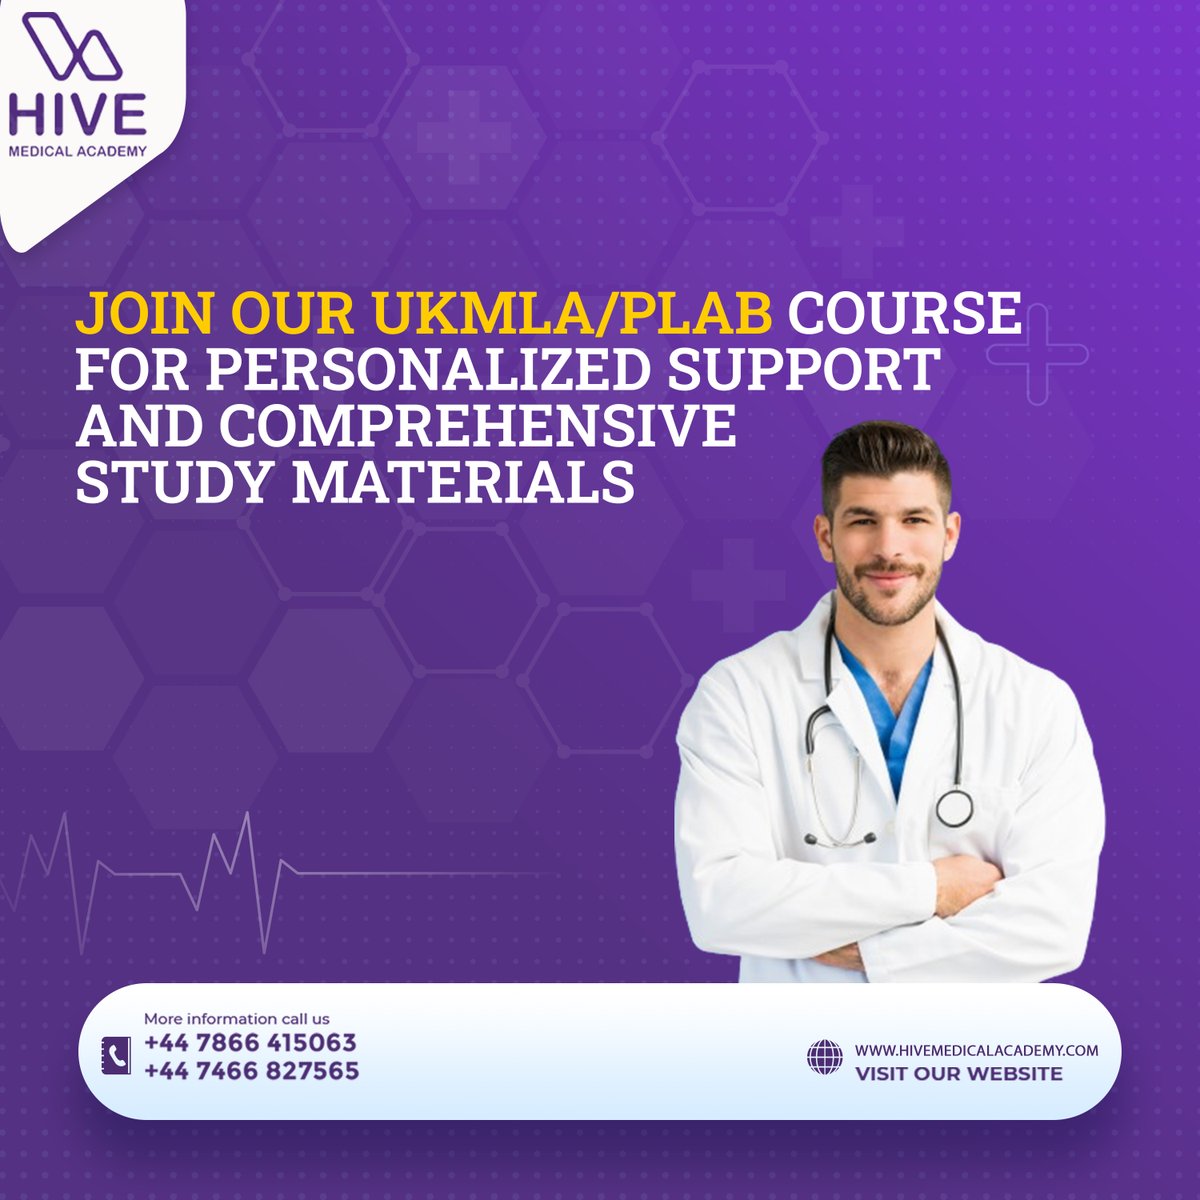 Ready to kick start your UK medical career? Enroll in our UKMLA/PLAB course and gain the knowledge, skills, and confidence needed to pass the exam with flying colors!
#PLAB #HiveMedicalAcademy #UKMedical #MedicalCareer #PLABExam #StudyAbroad #MedEd #MedicalStudents #CareerDevelop